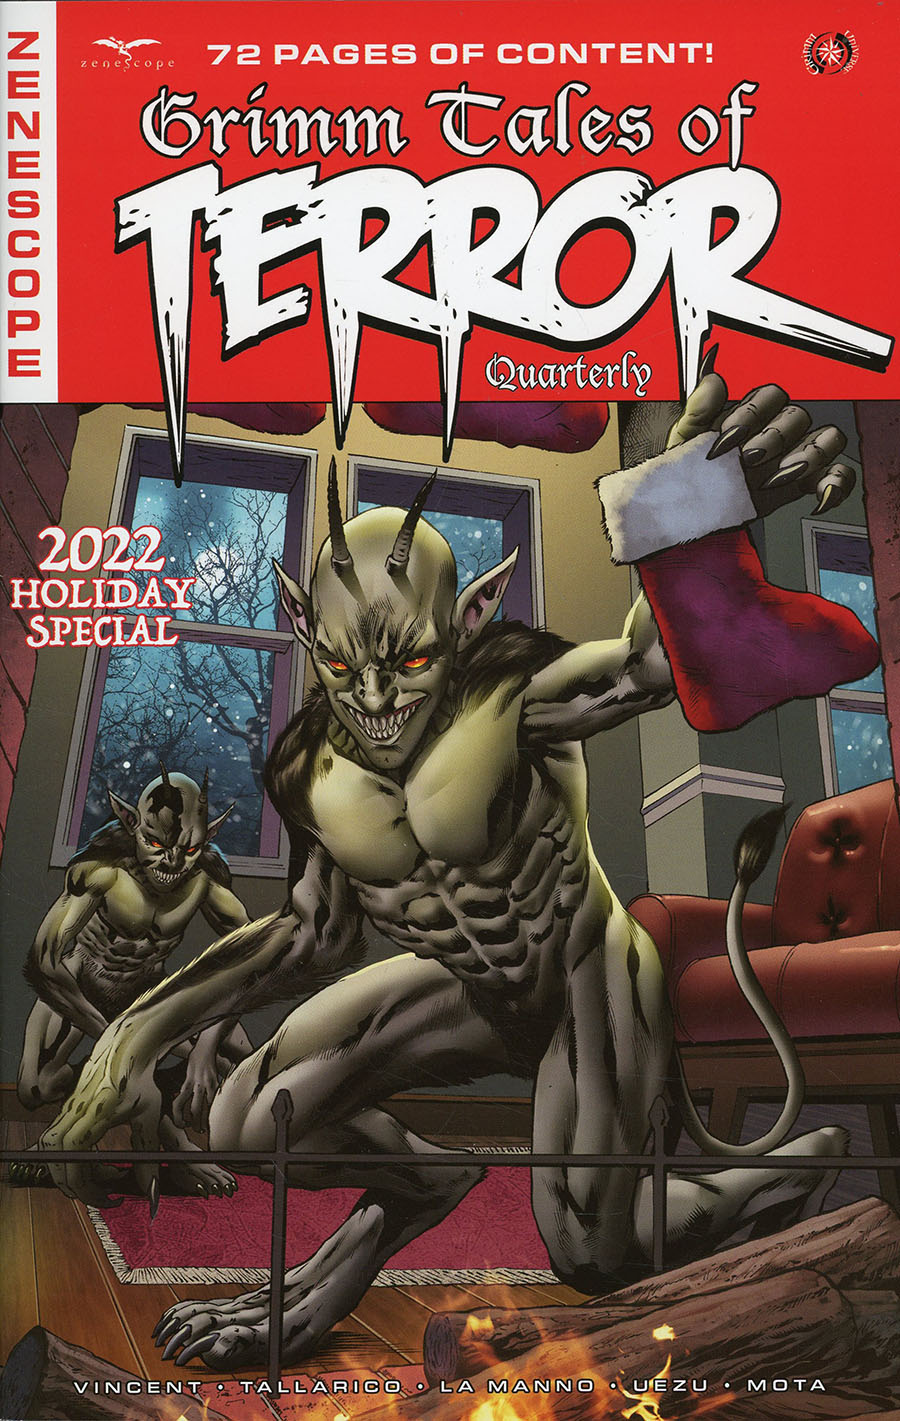 Grimm Fairy Tales Presents Grimm Tales Of Terror Quarterly #8 2022 Holiday Special Cover B Igor Vitorino